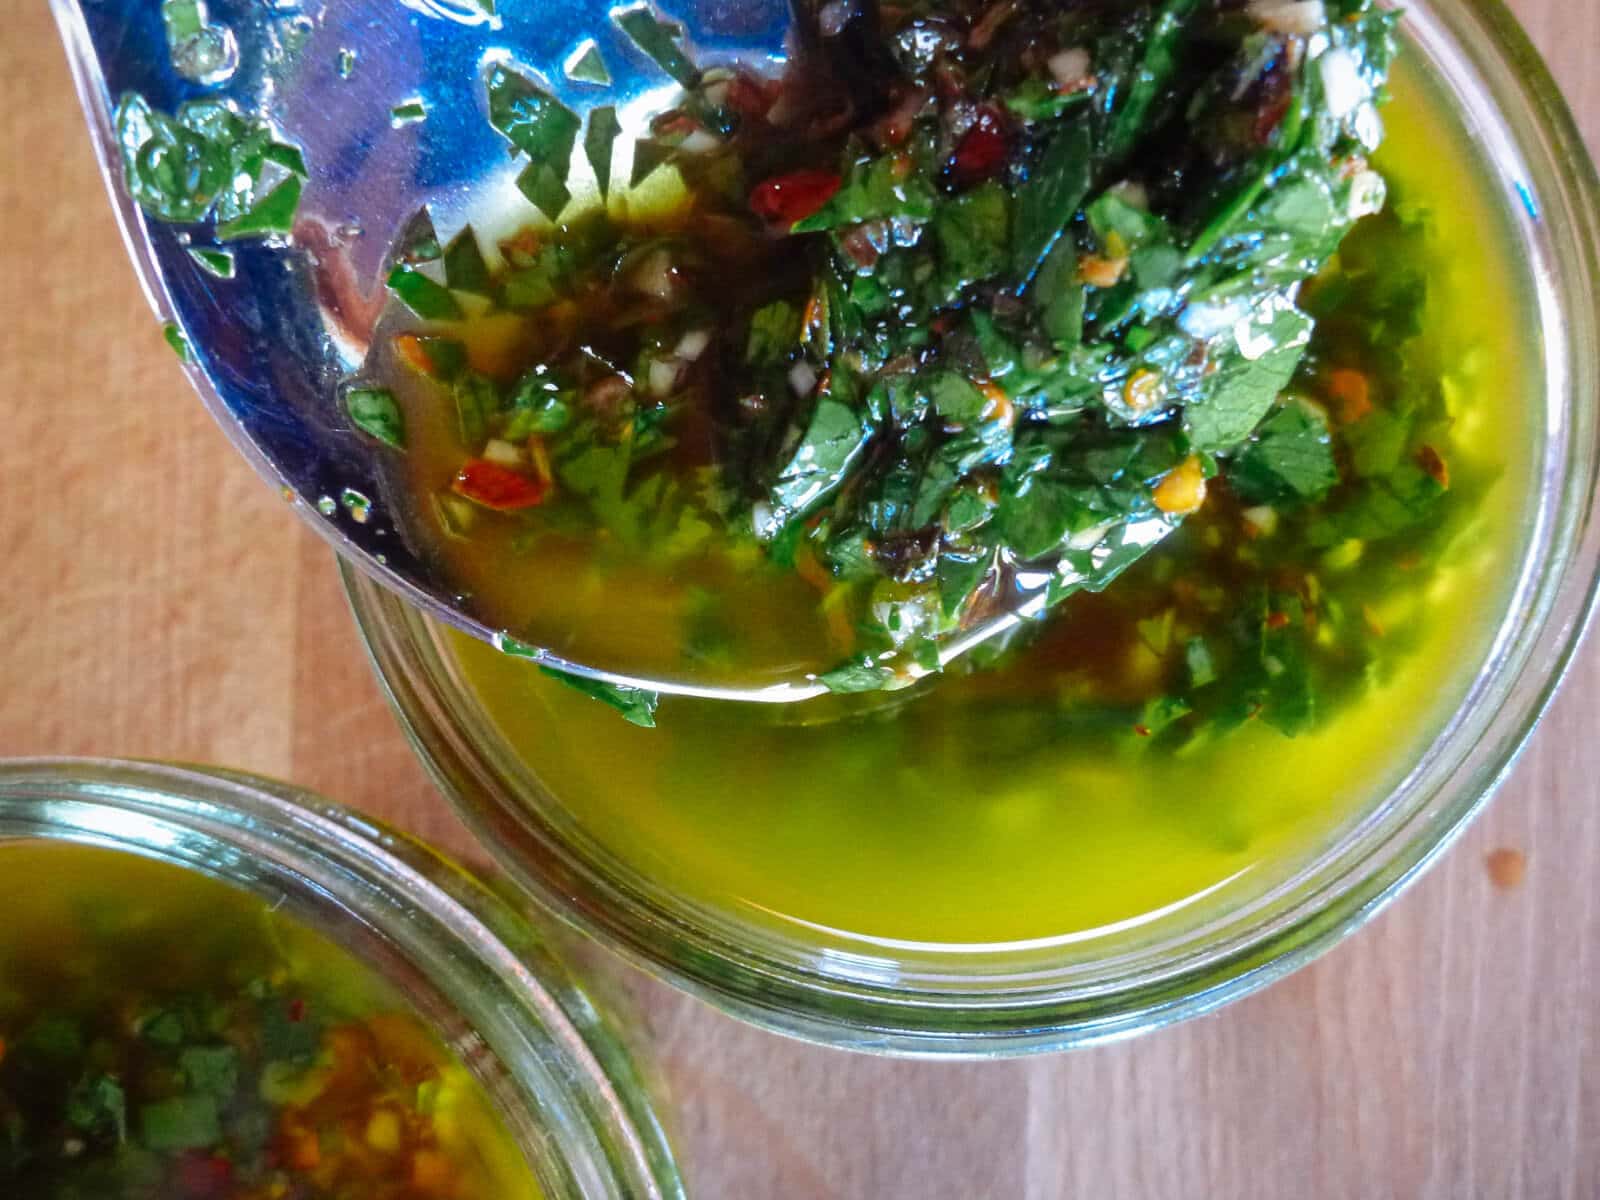 Let the chimichurri sit at room temperature overnight for the flavors to develop